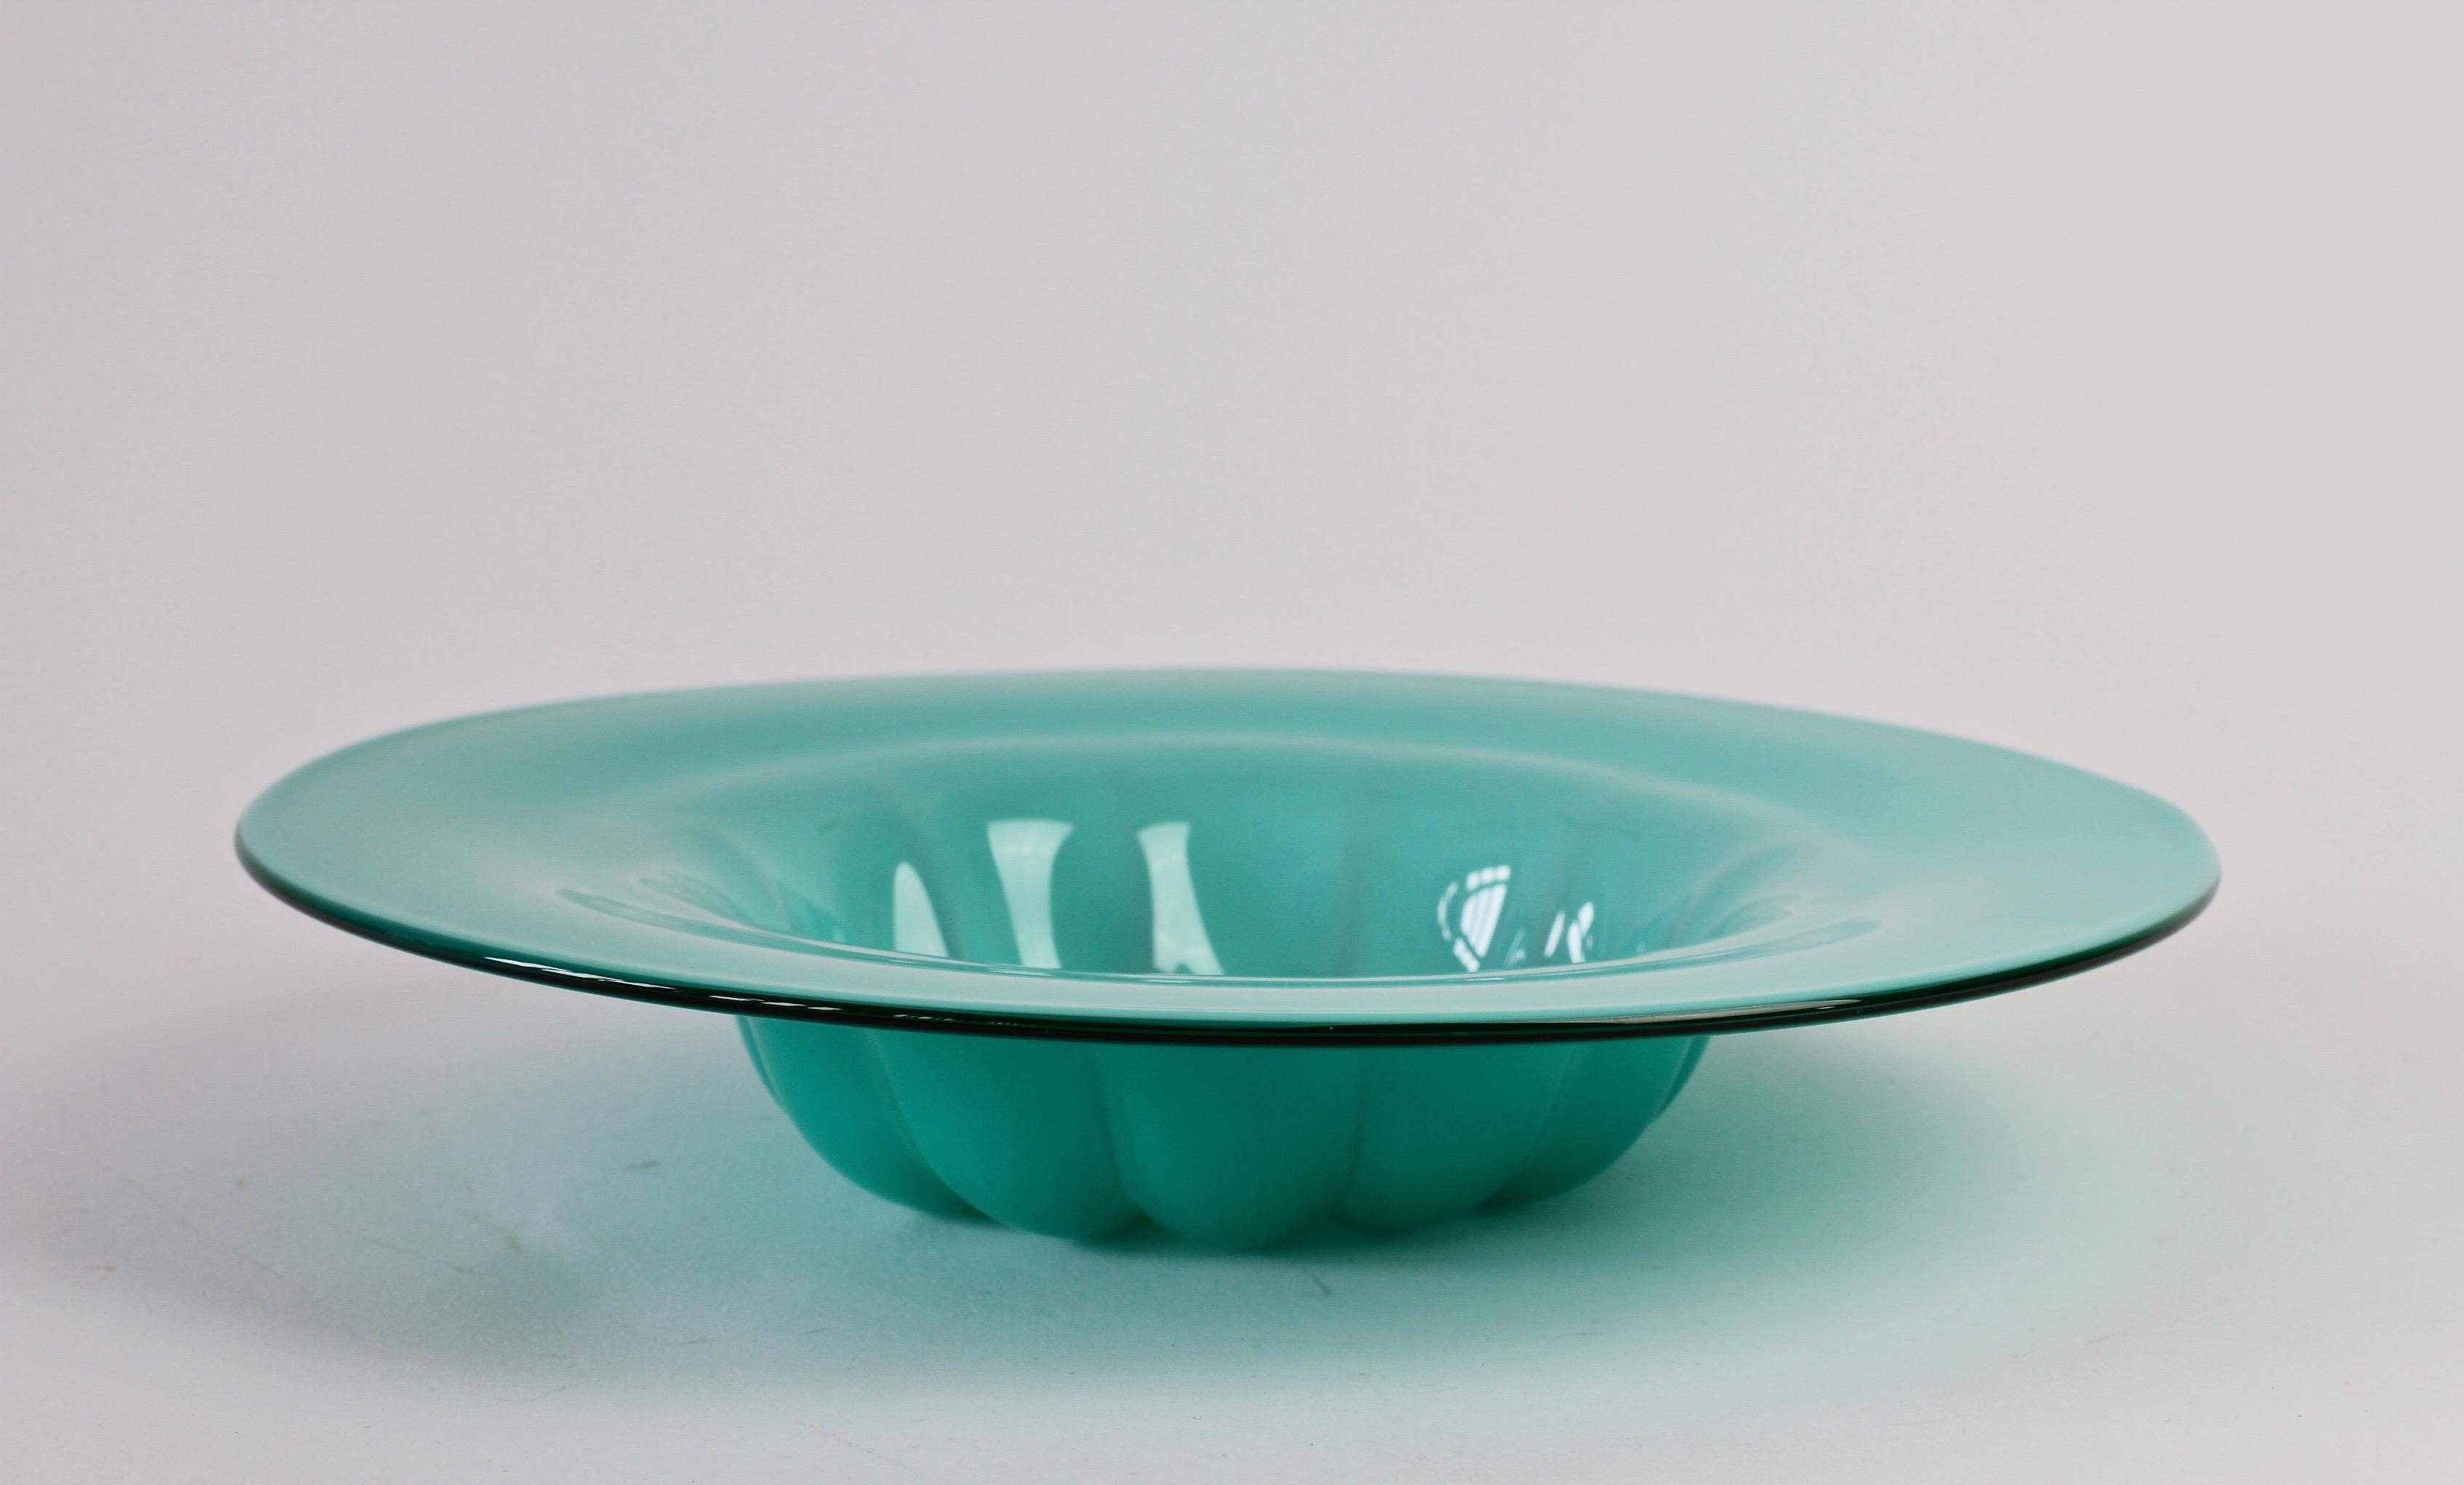 Blown Glass Colorful Cenedese Turquoise Green Vintage Italian Murano Glass Bowl or Dish For Sale